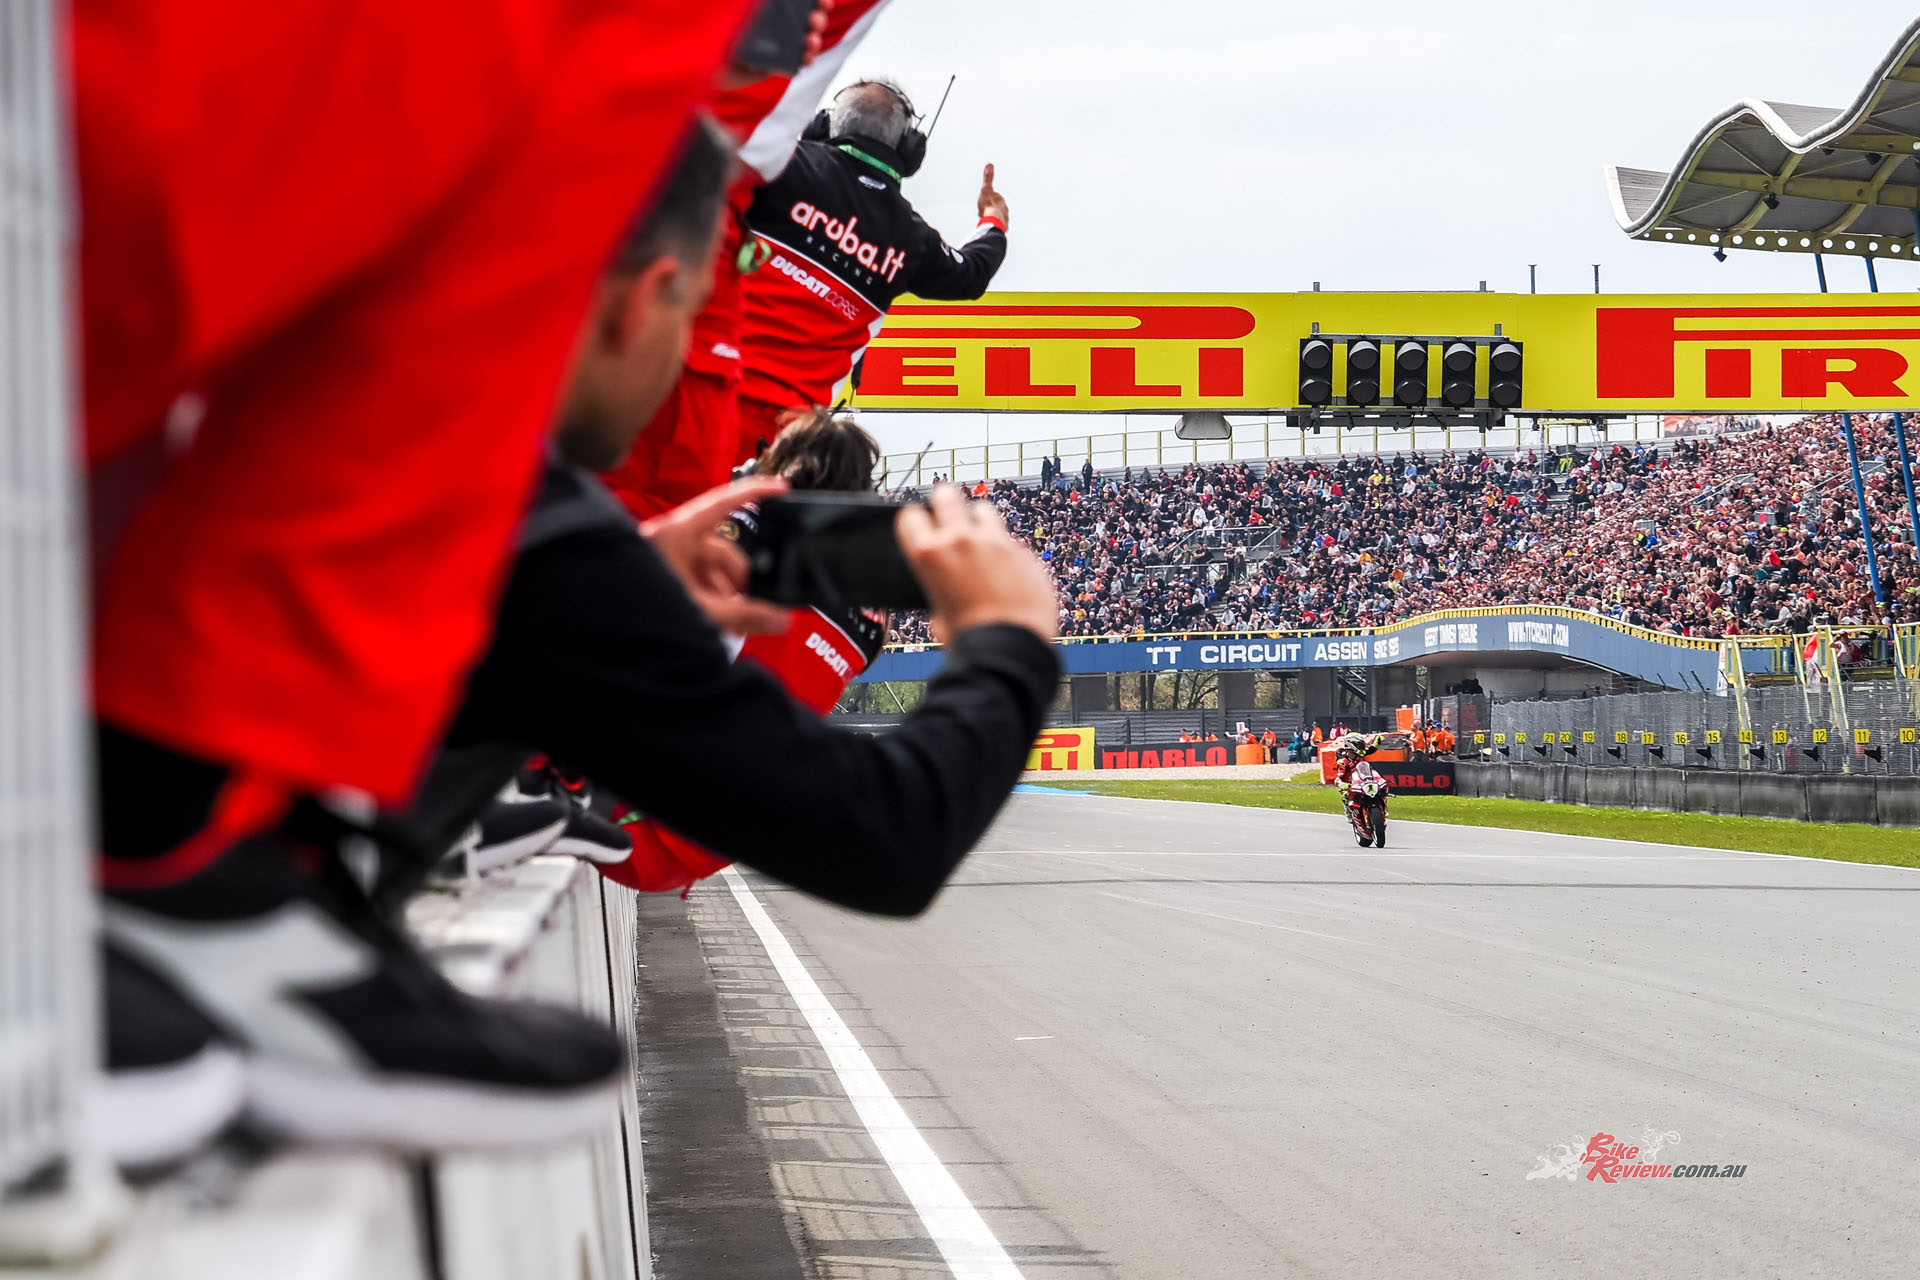 Reigning Champion Alvaro Bautista battled his way back from fourth on the grid to claim Race 1 victory in the Netherlands ahead of Rea and Razgatlioglu.